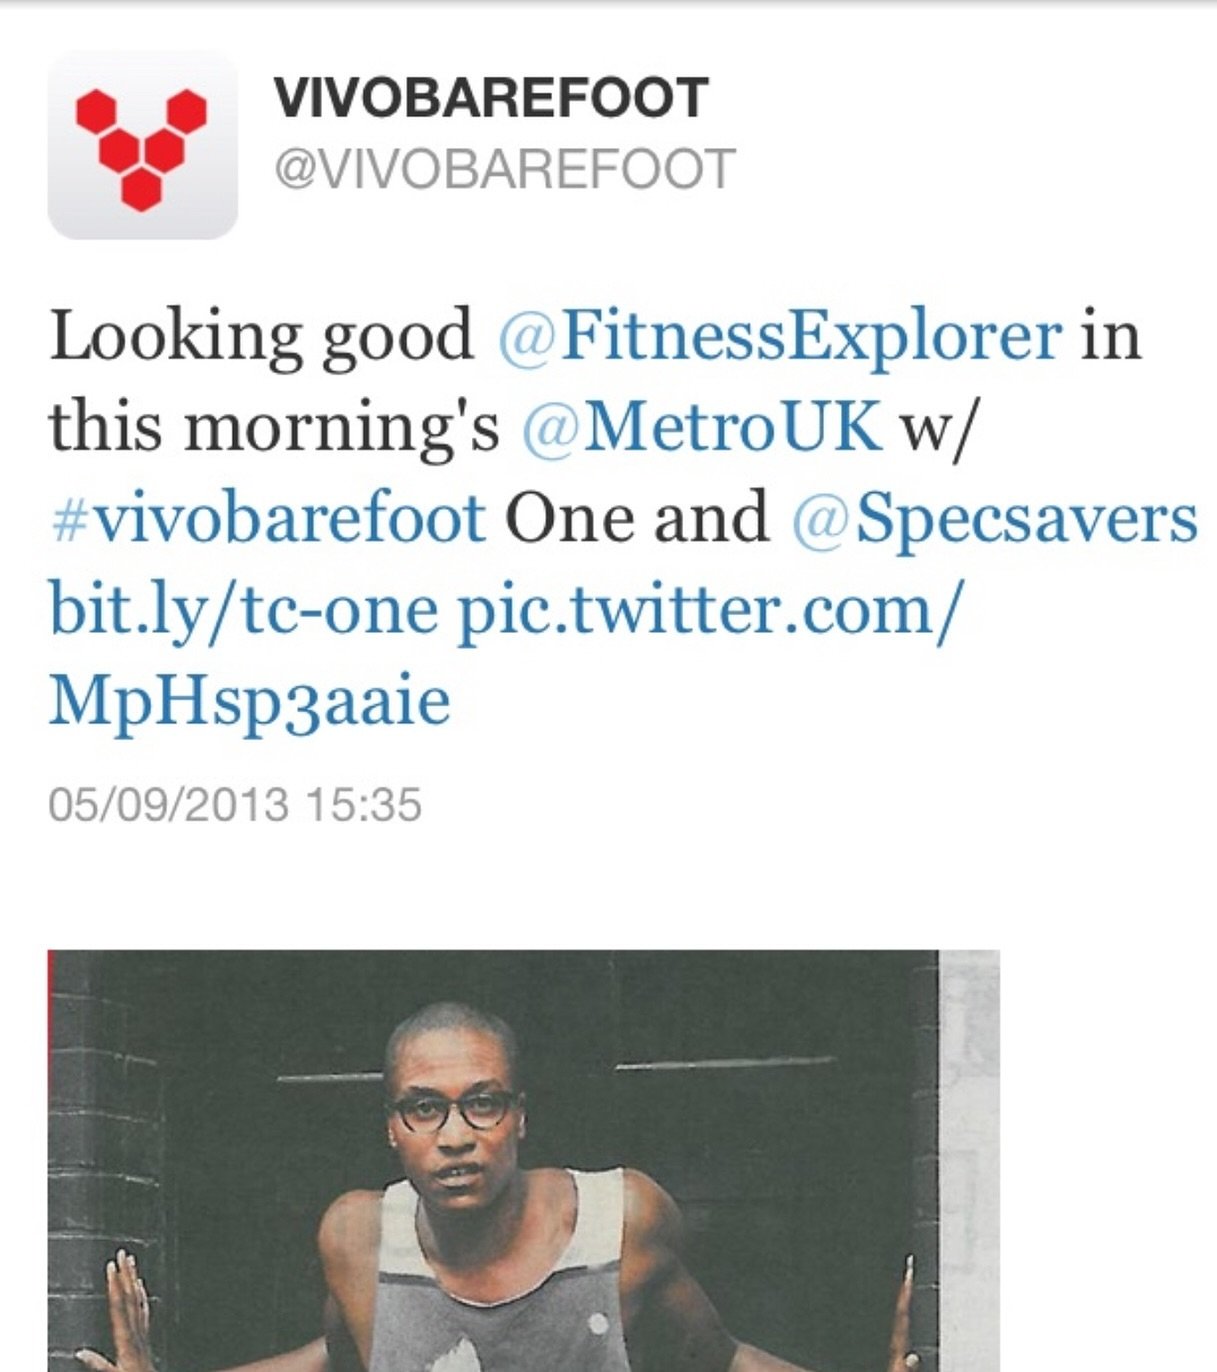 This was back in 2013 when I happened to be in a @specsavers photoshoot in the @metro.co.uk and wore my Vivobarefoot shoes.

Let&rsquo;s just say I was wearing @vivobarefoot when they launched the brand back in 2012, and I was wearing the Terraplana 